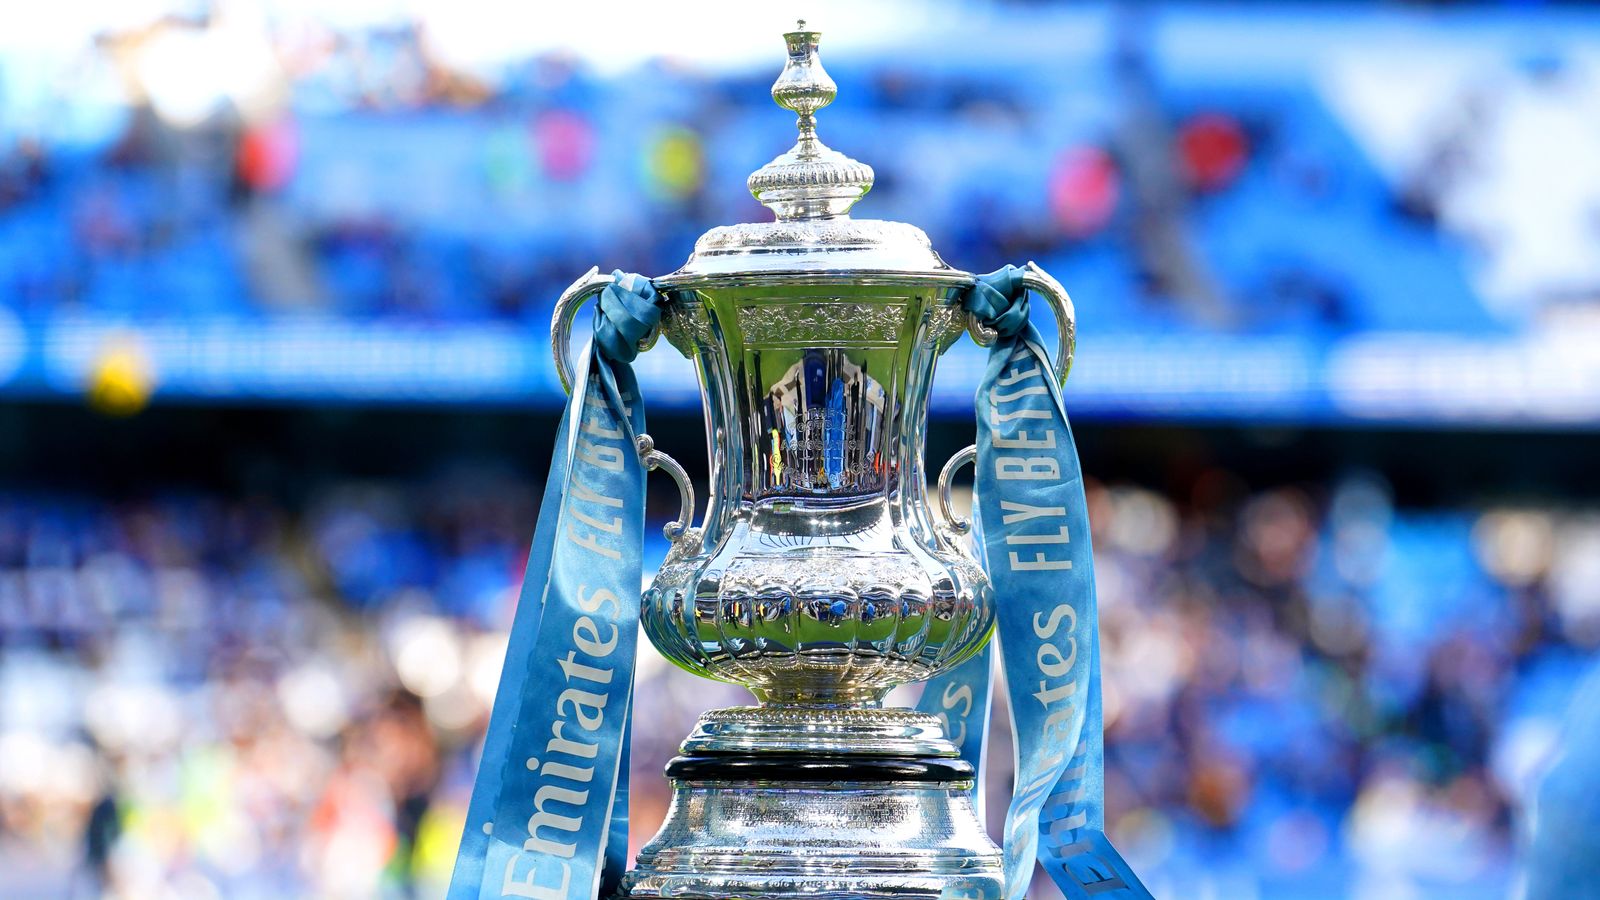 Man Utd draw Coventry in FA Cup semifinals and holders Man City face